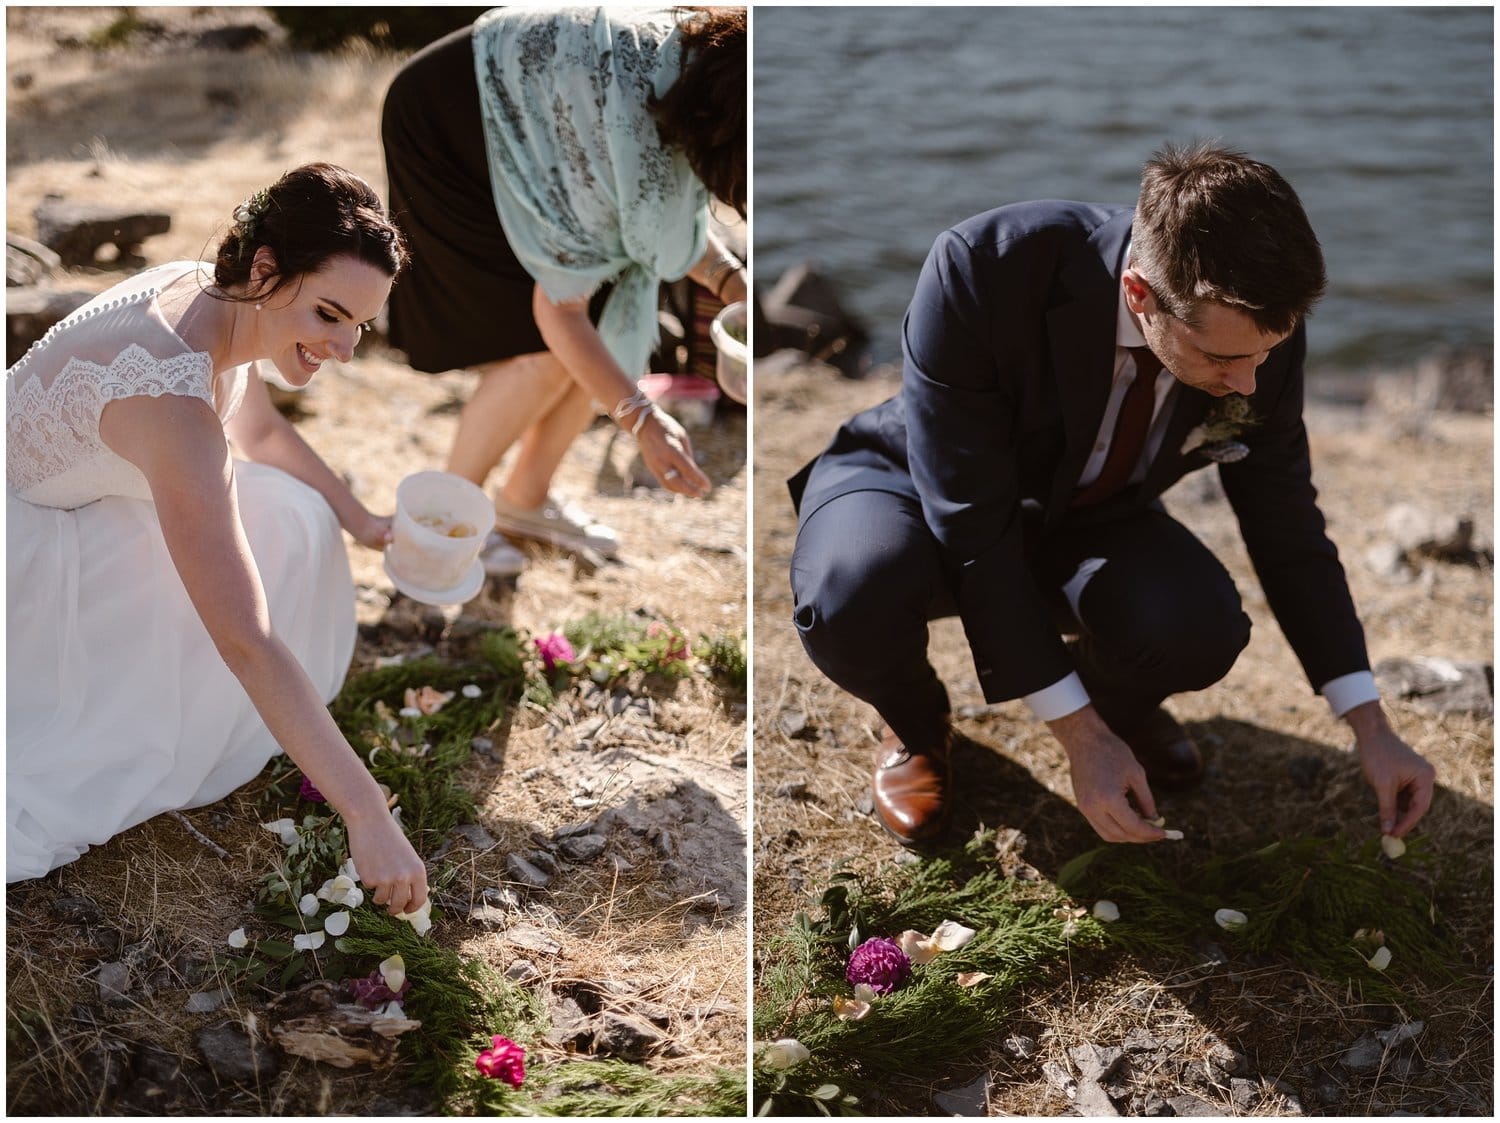 Bride and groom create a circle of flower petals and greenery on the ground for their elopement ceremony at the Columbia River Gorge, in Oregon.